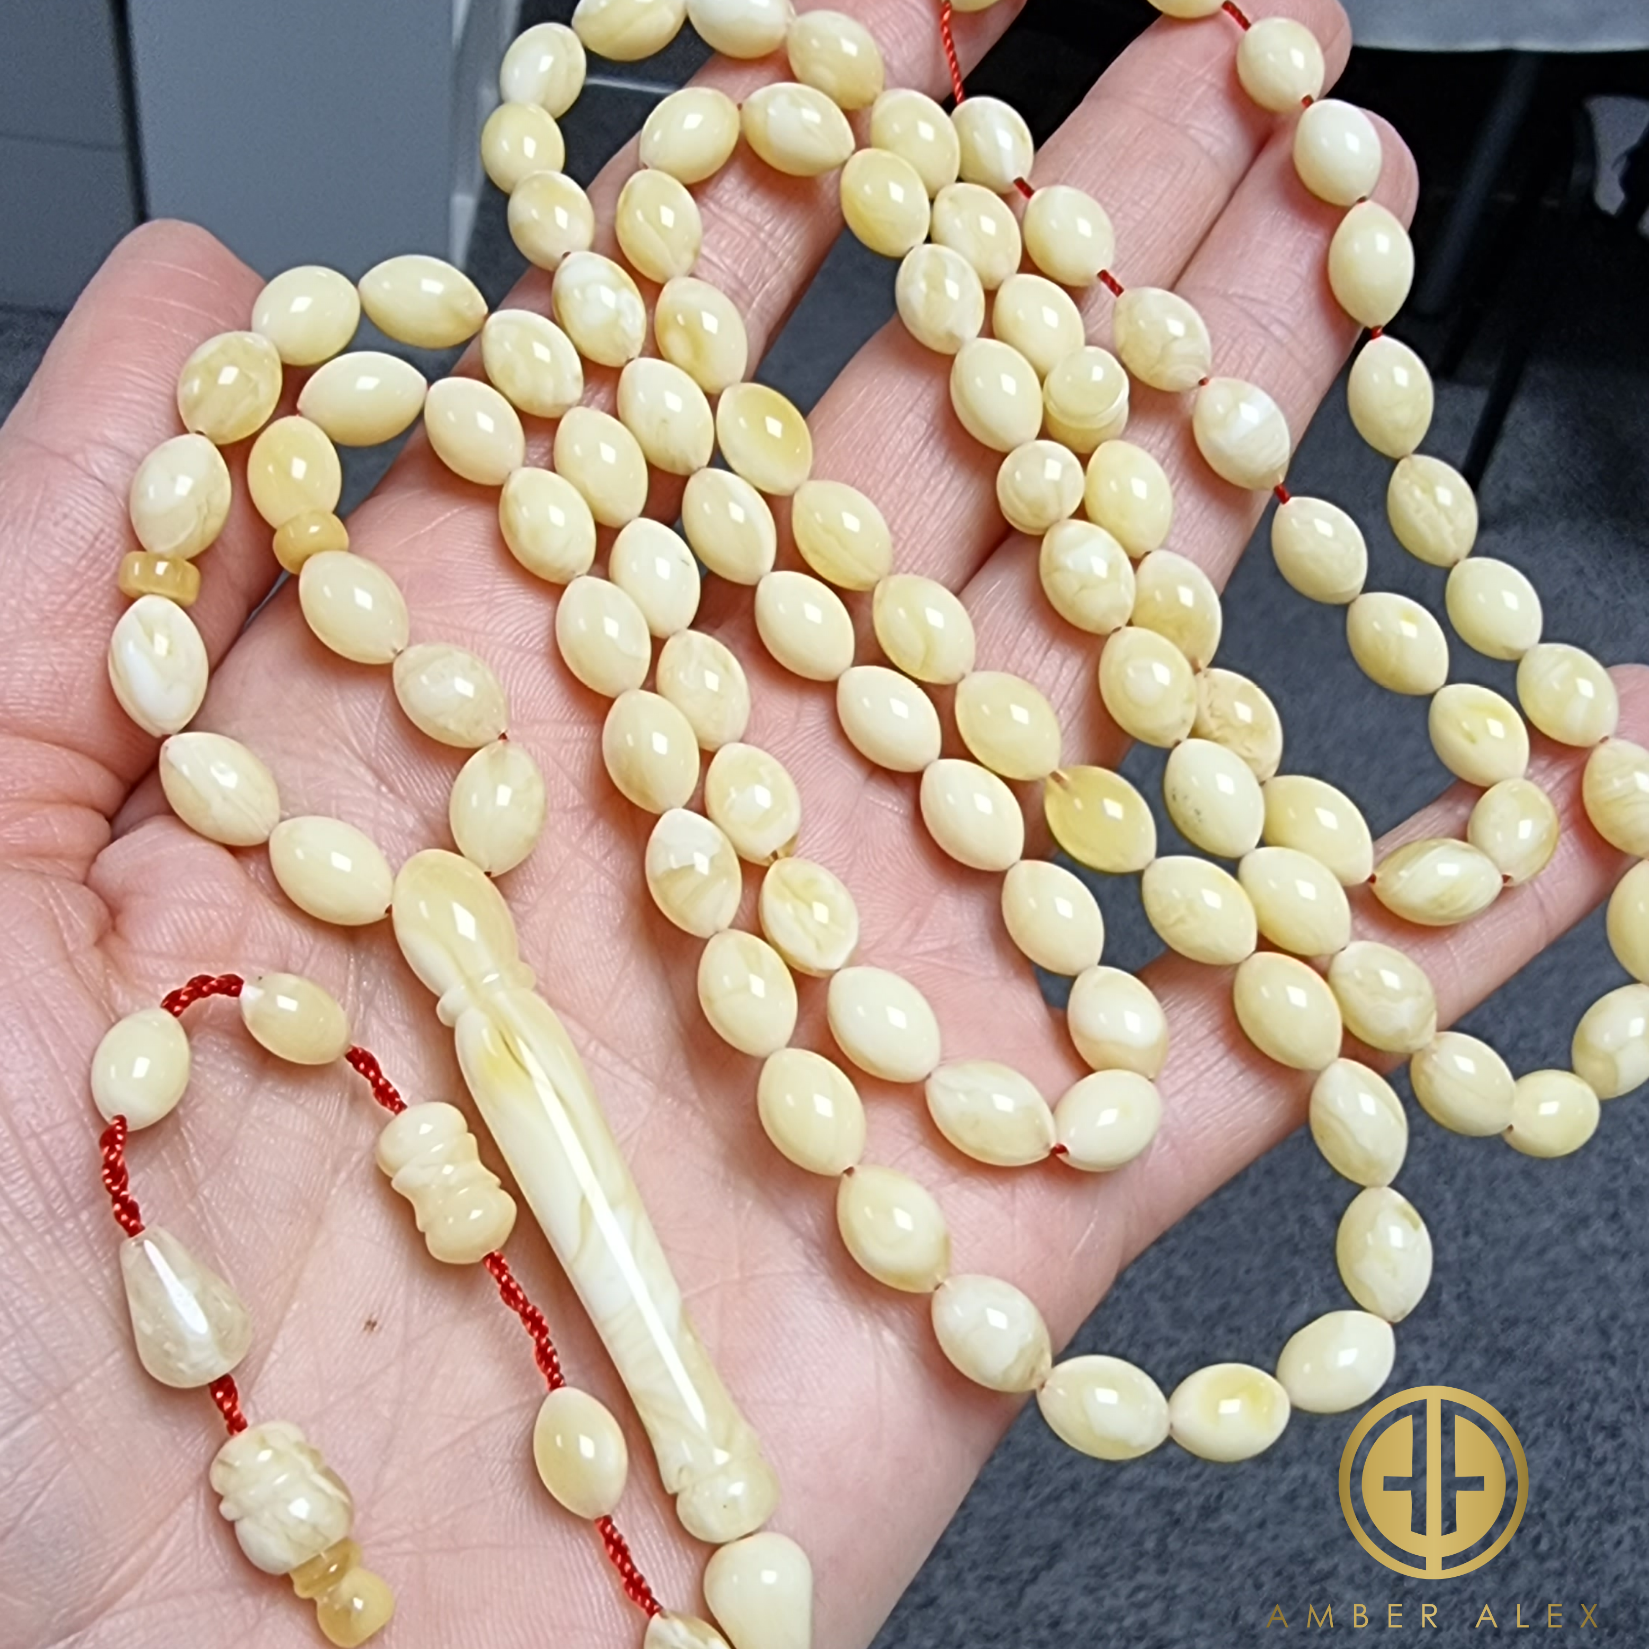 White With Yellow Amber Olive Shape 6.5 mm Islamic Rosary Beads